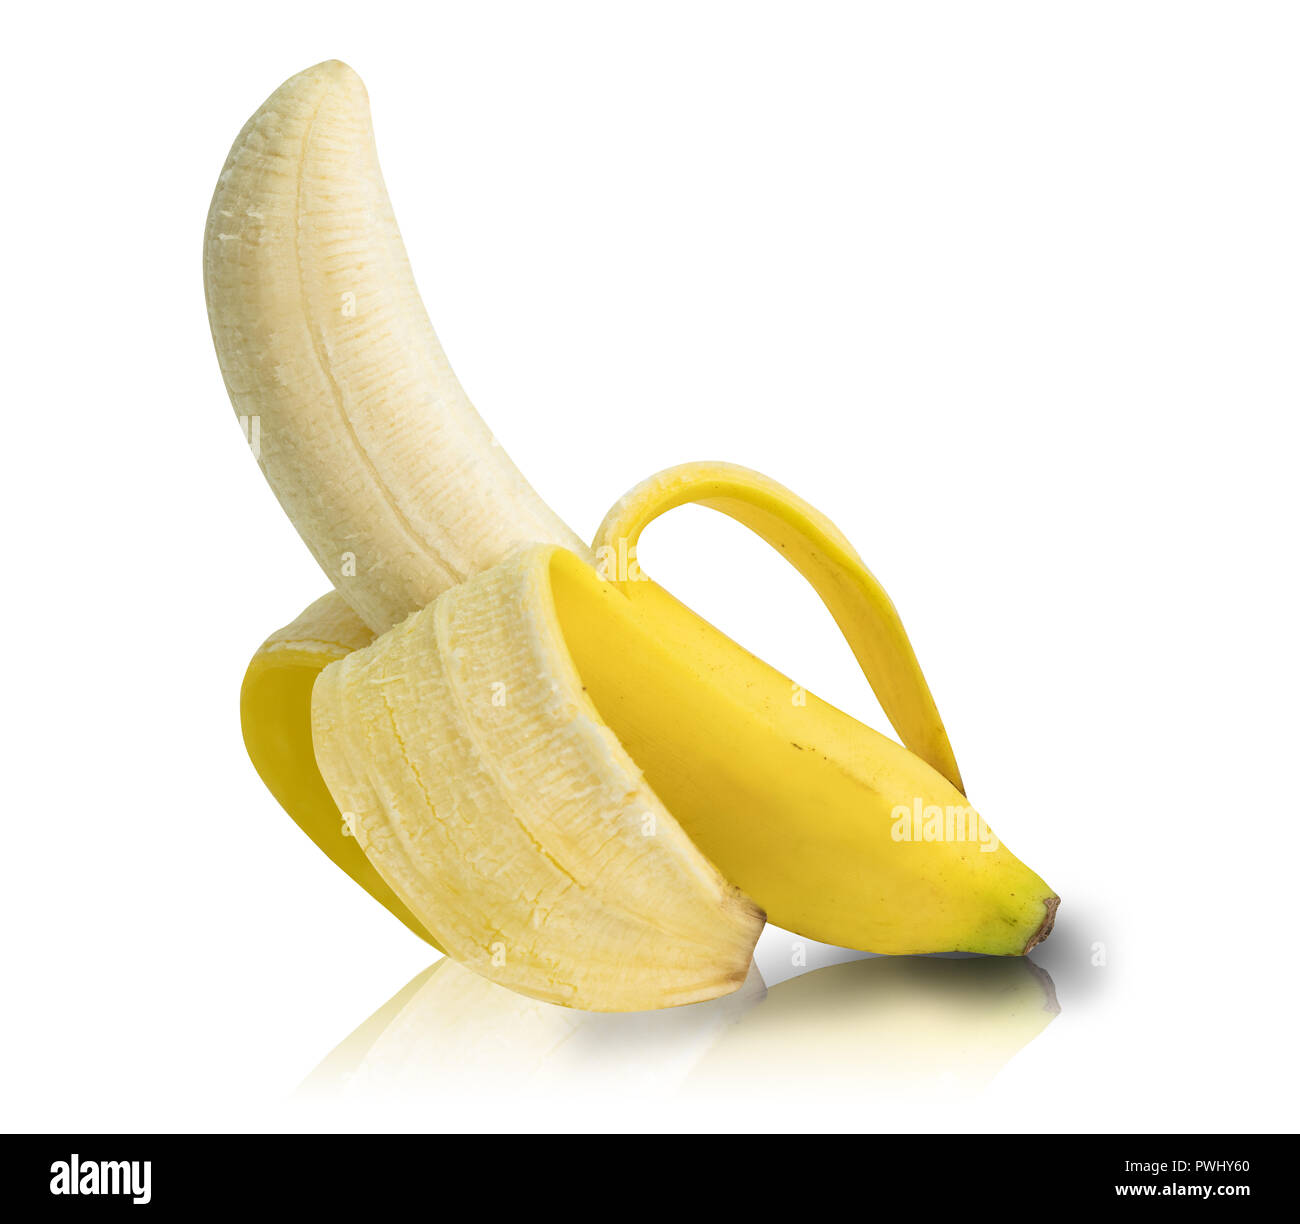 banana isolated on white background with clipping path Stock Photo